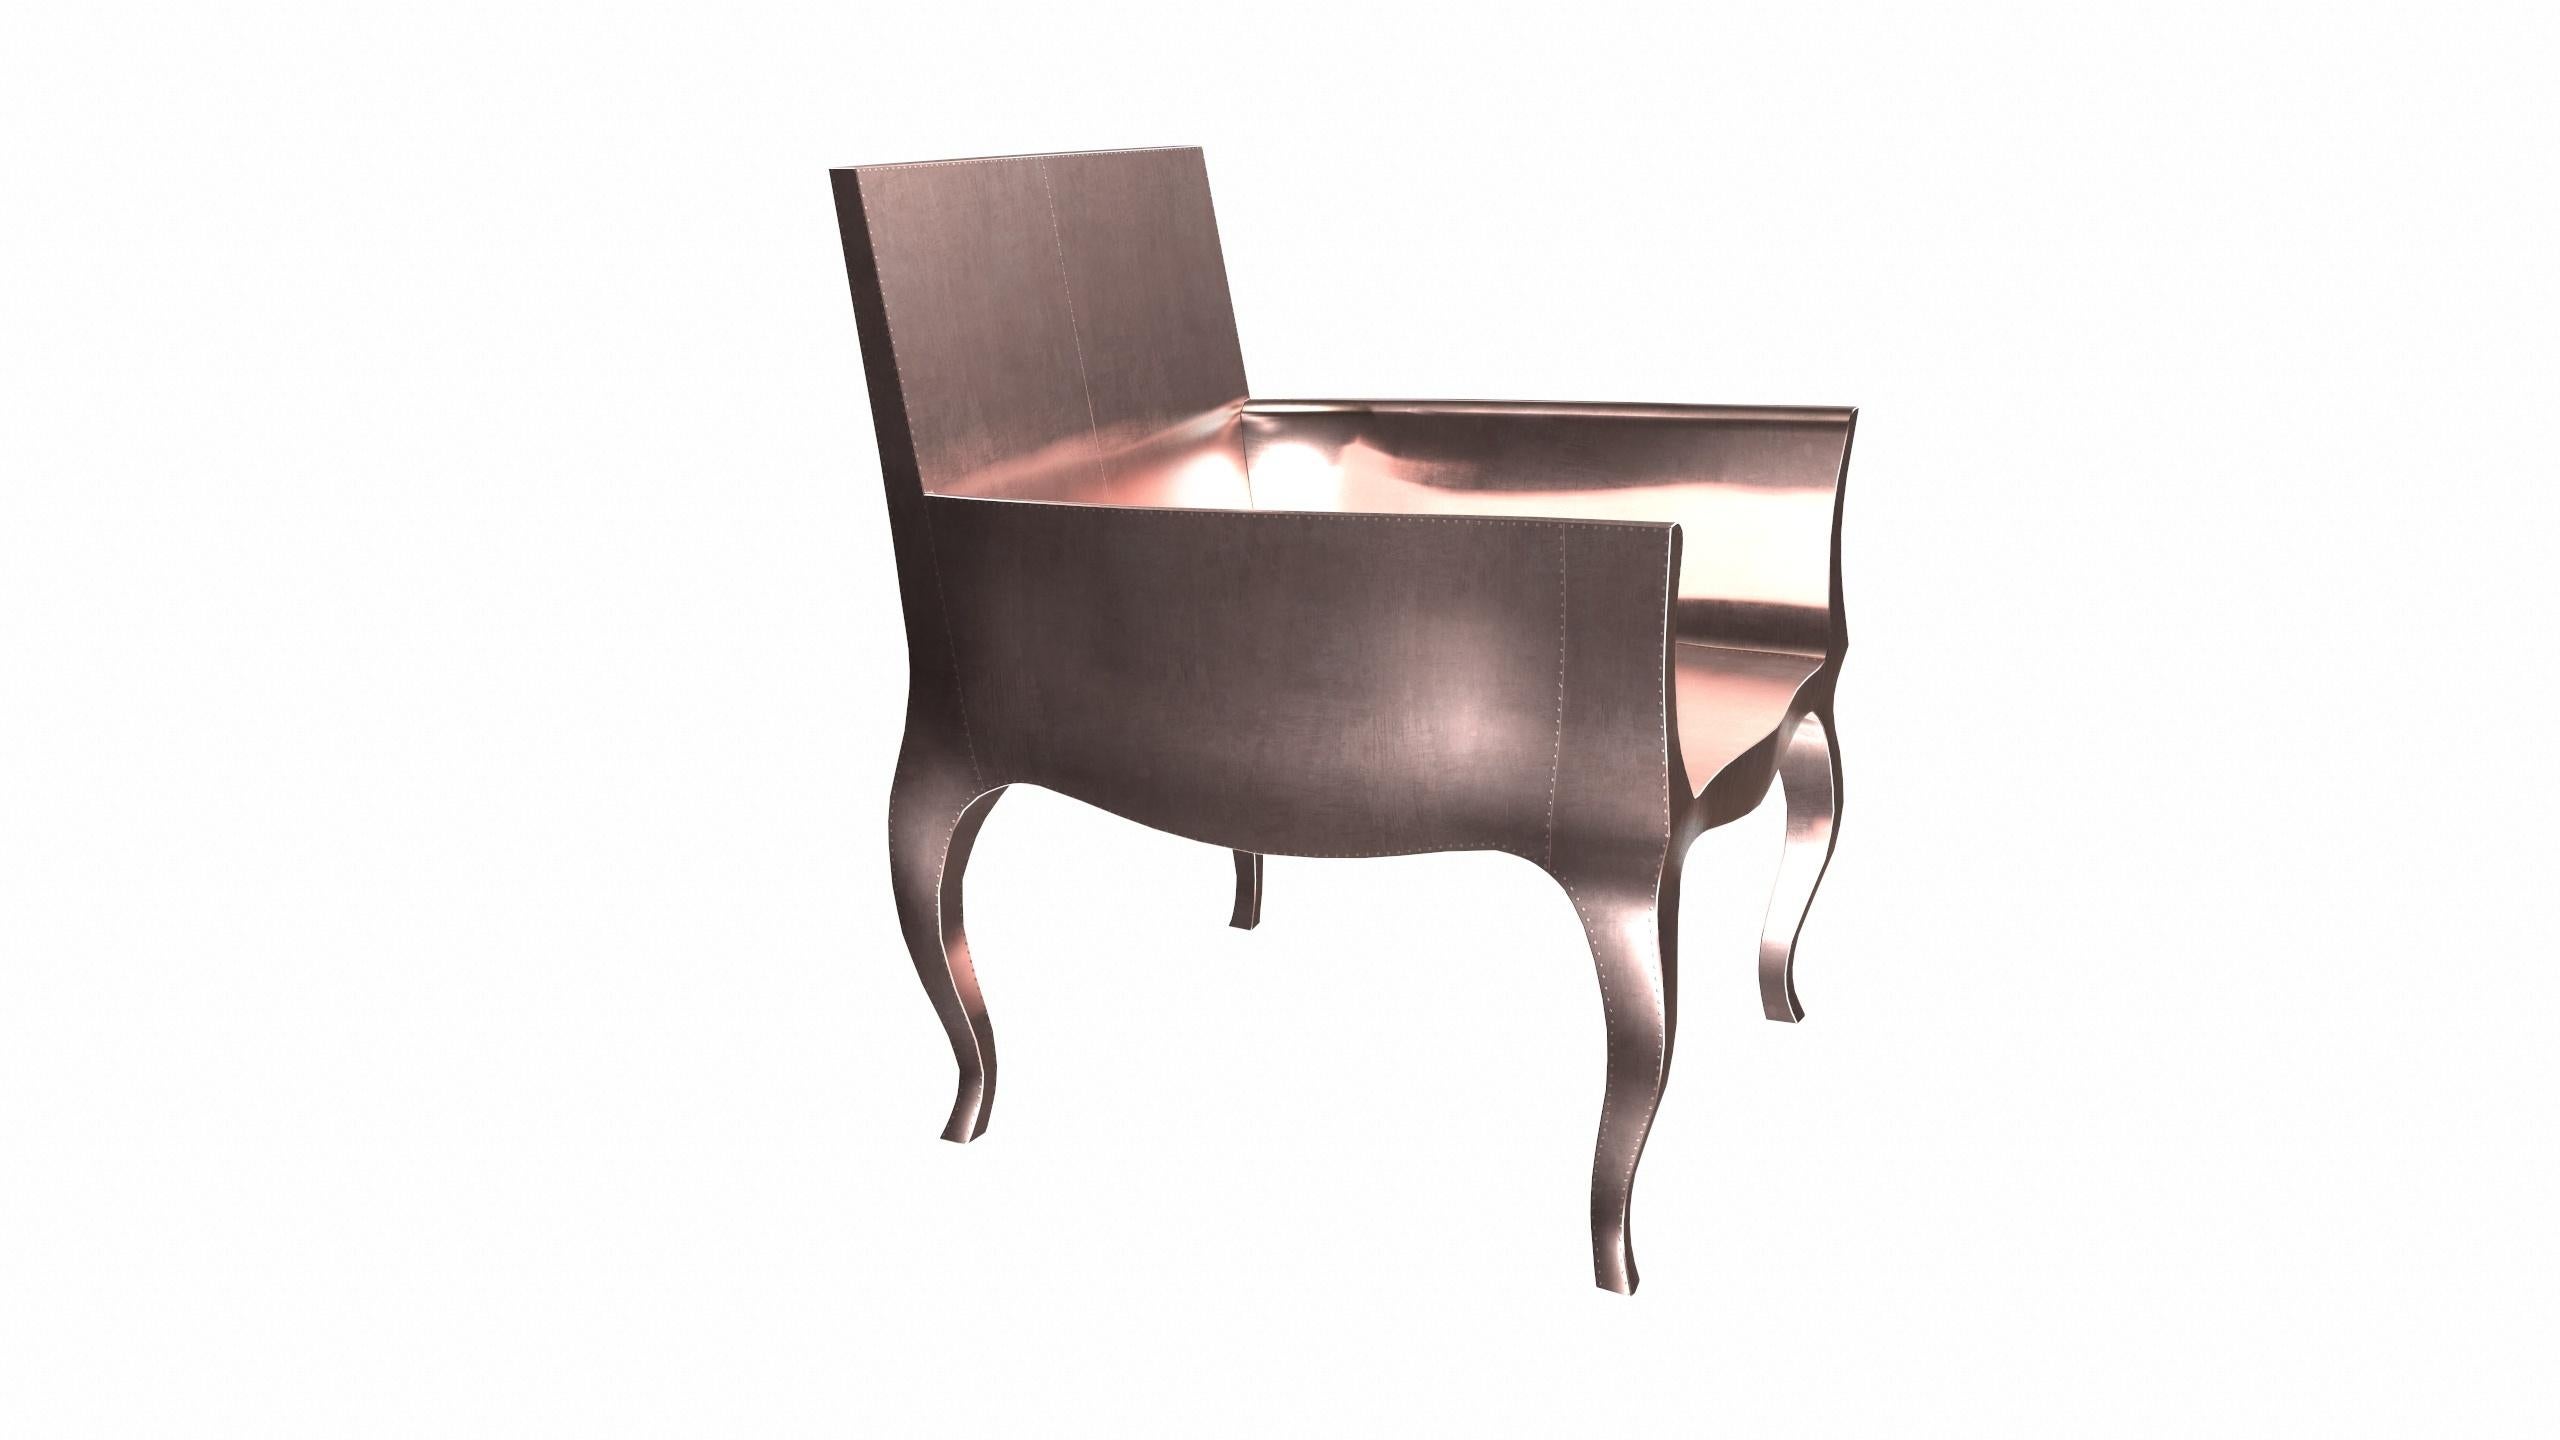 Hand-Carved Art Deco Side Chairs in Smooth Copper by Paul Mathieu for S. Odegard For Sale